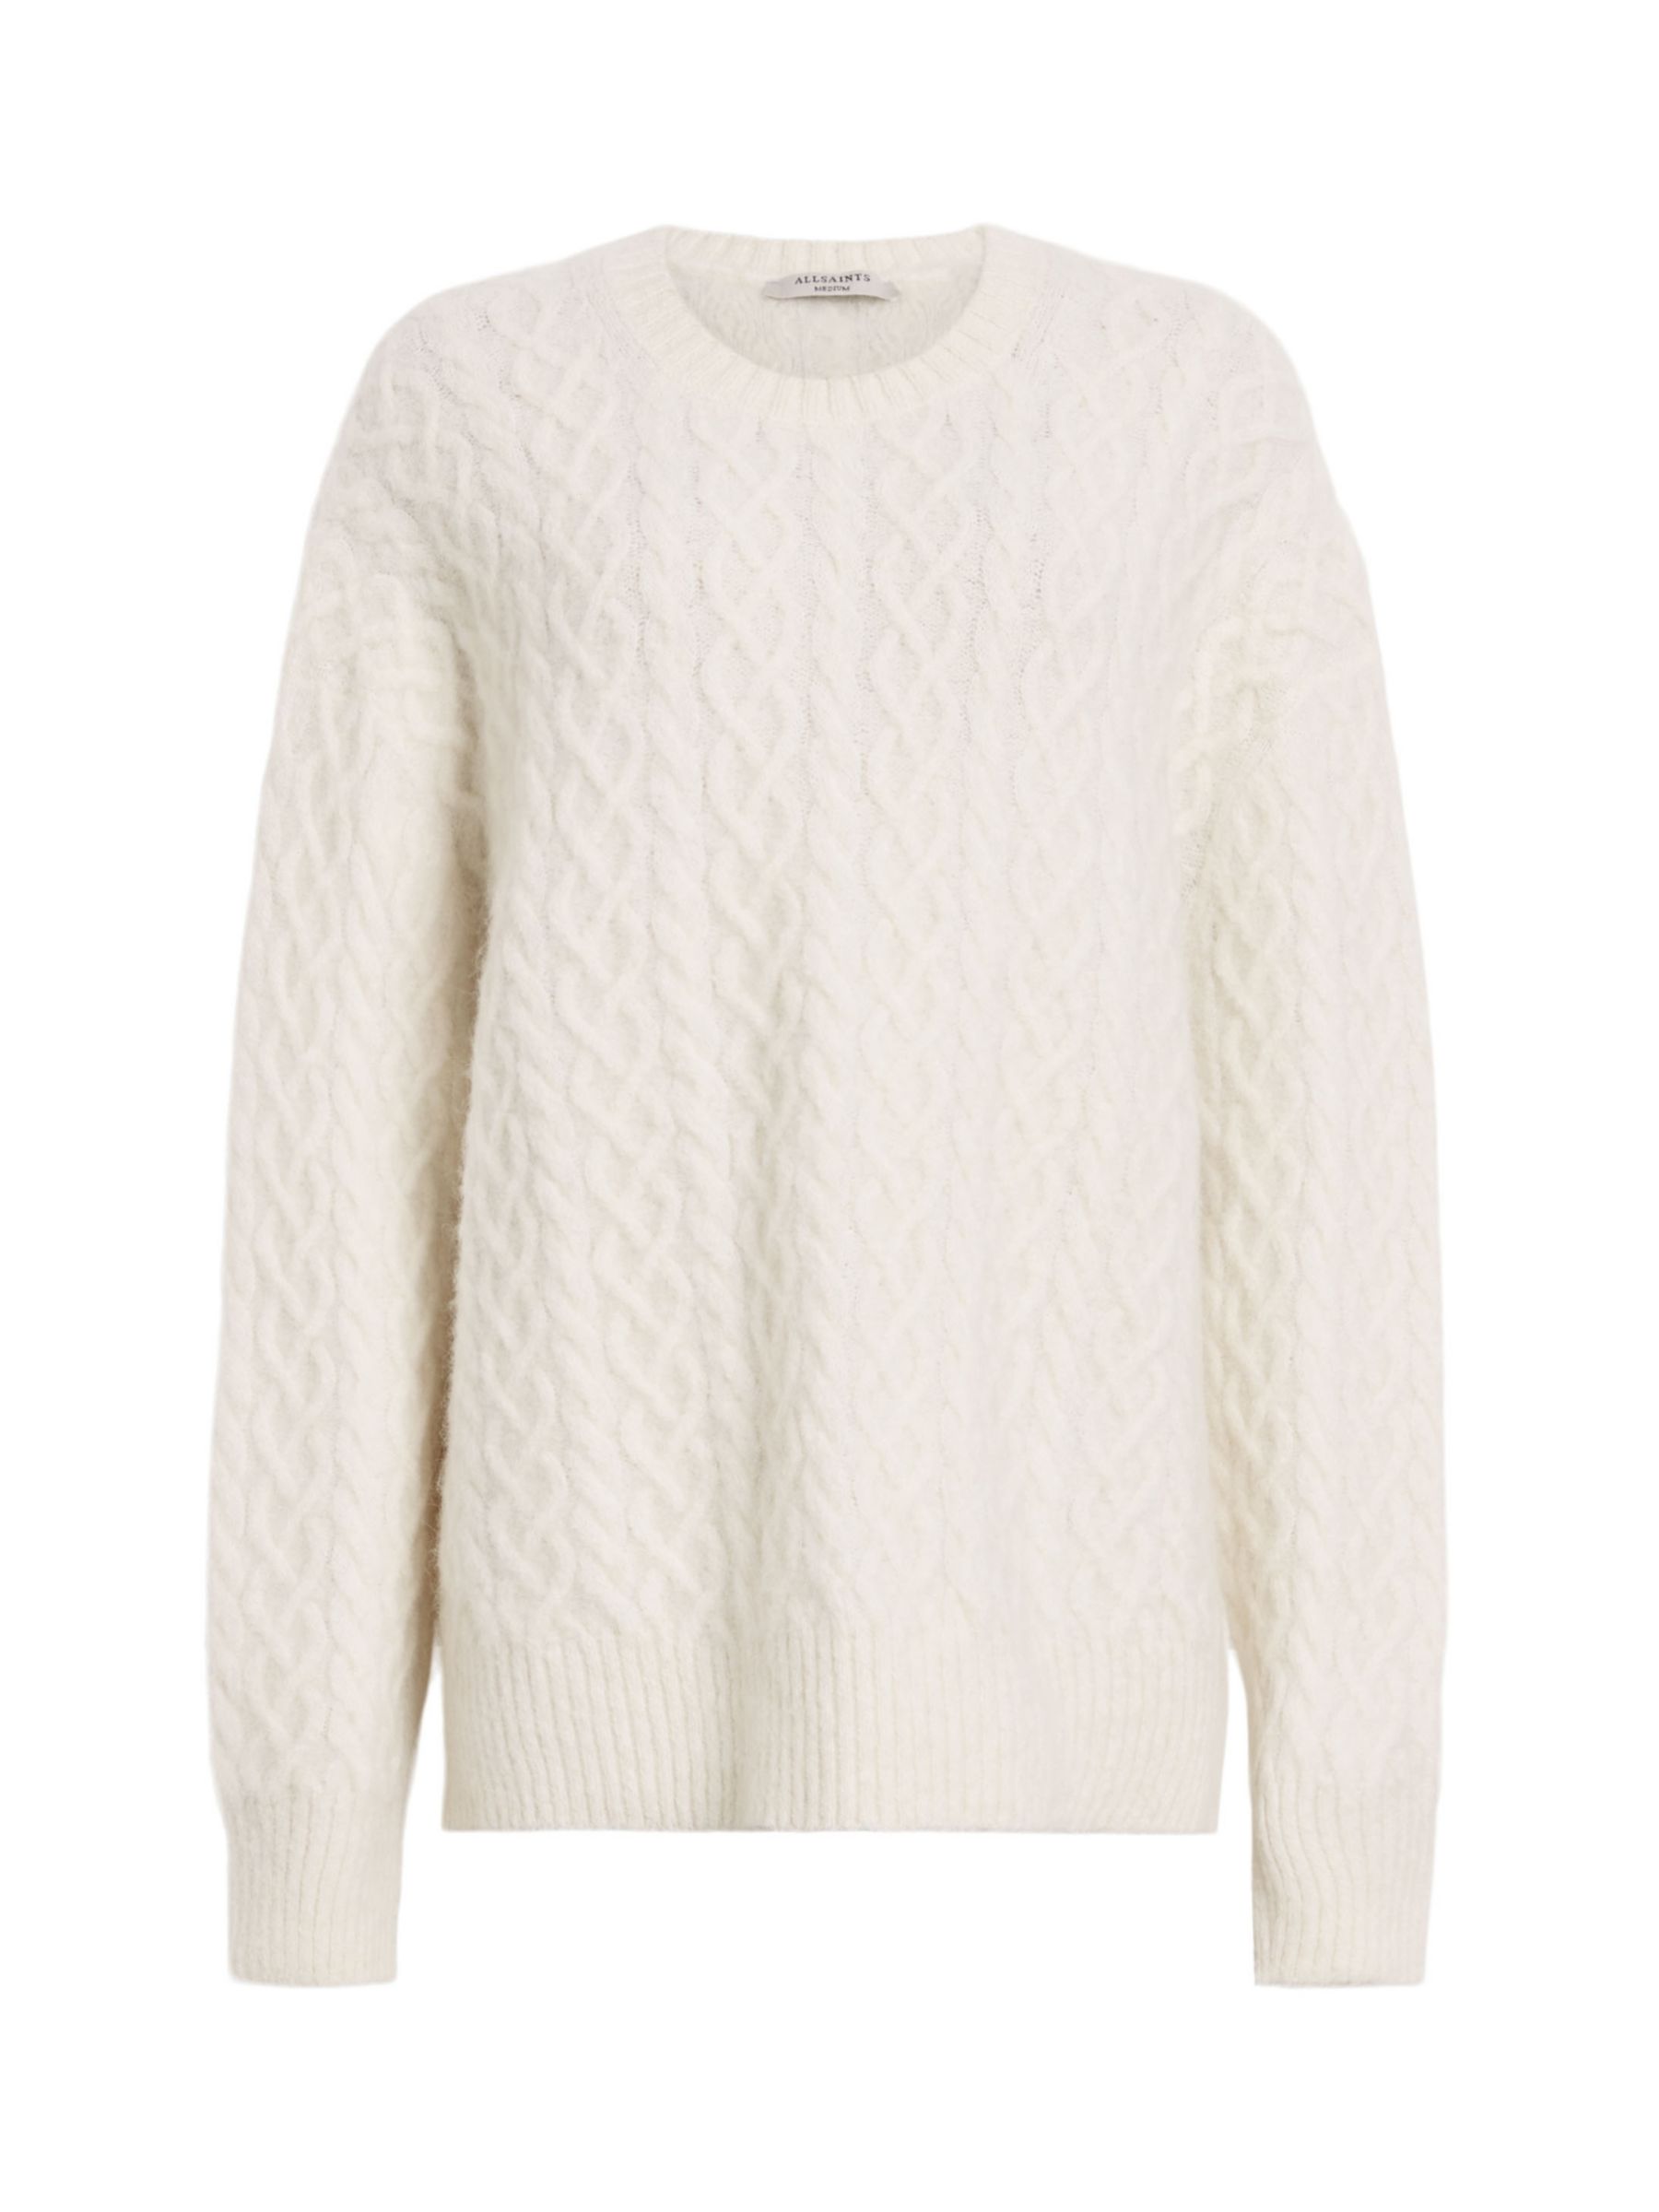 AllSaints Women's Melodie 100% Wool Ribbed Sweater Chalk White